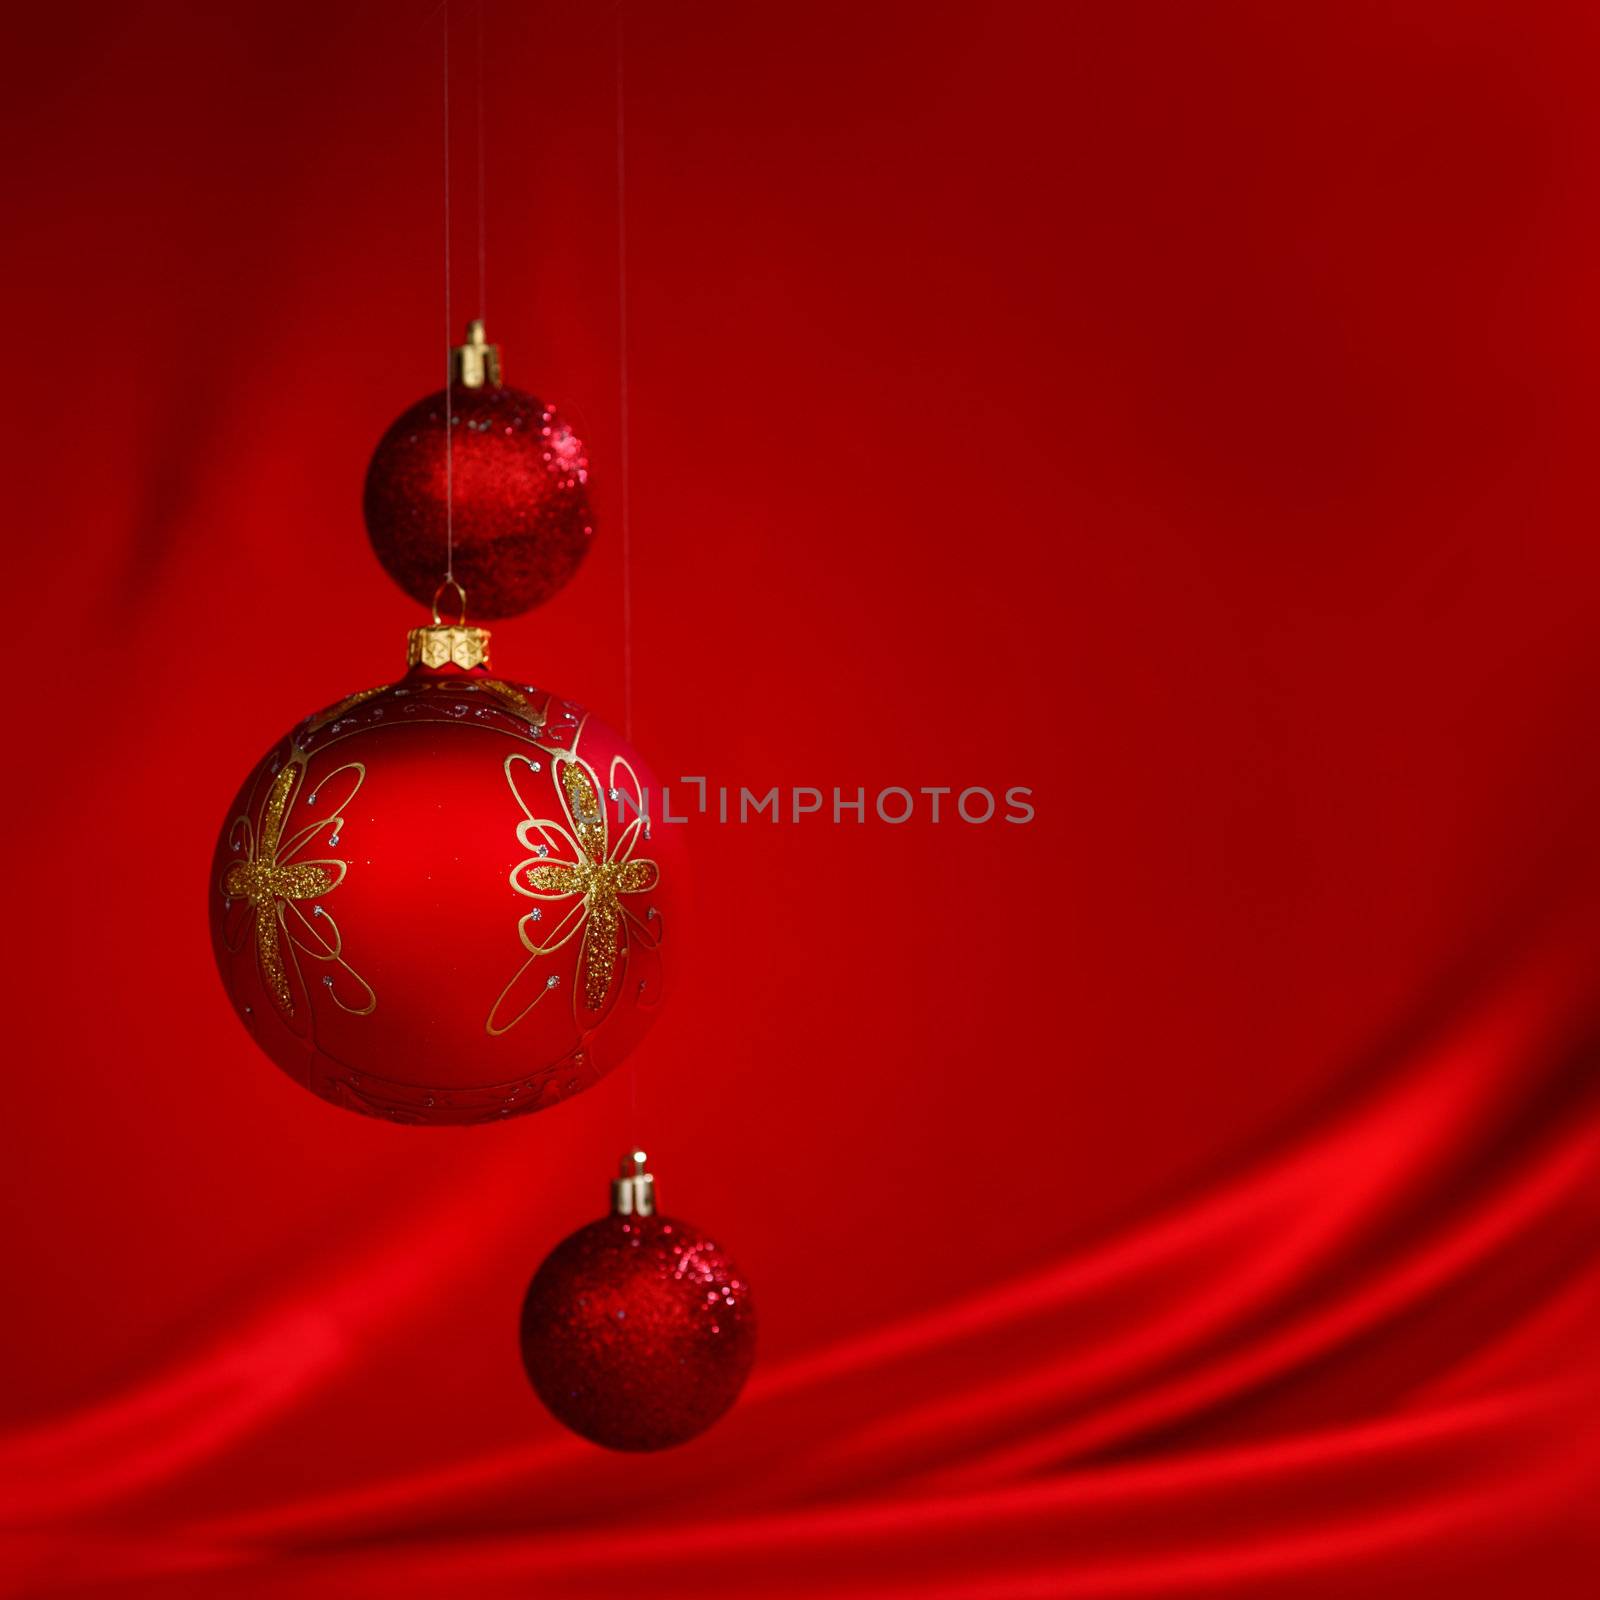  christmas balls on red satin background